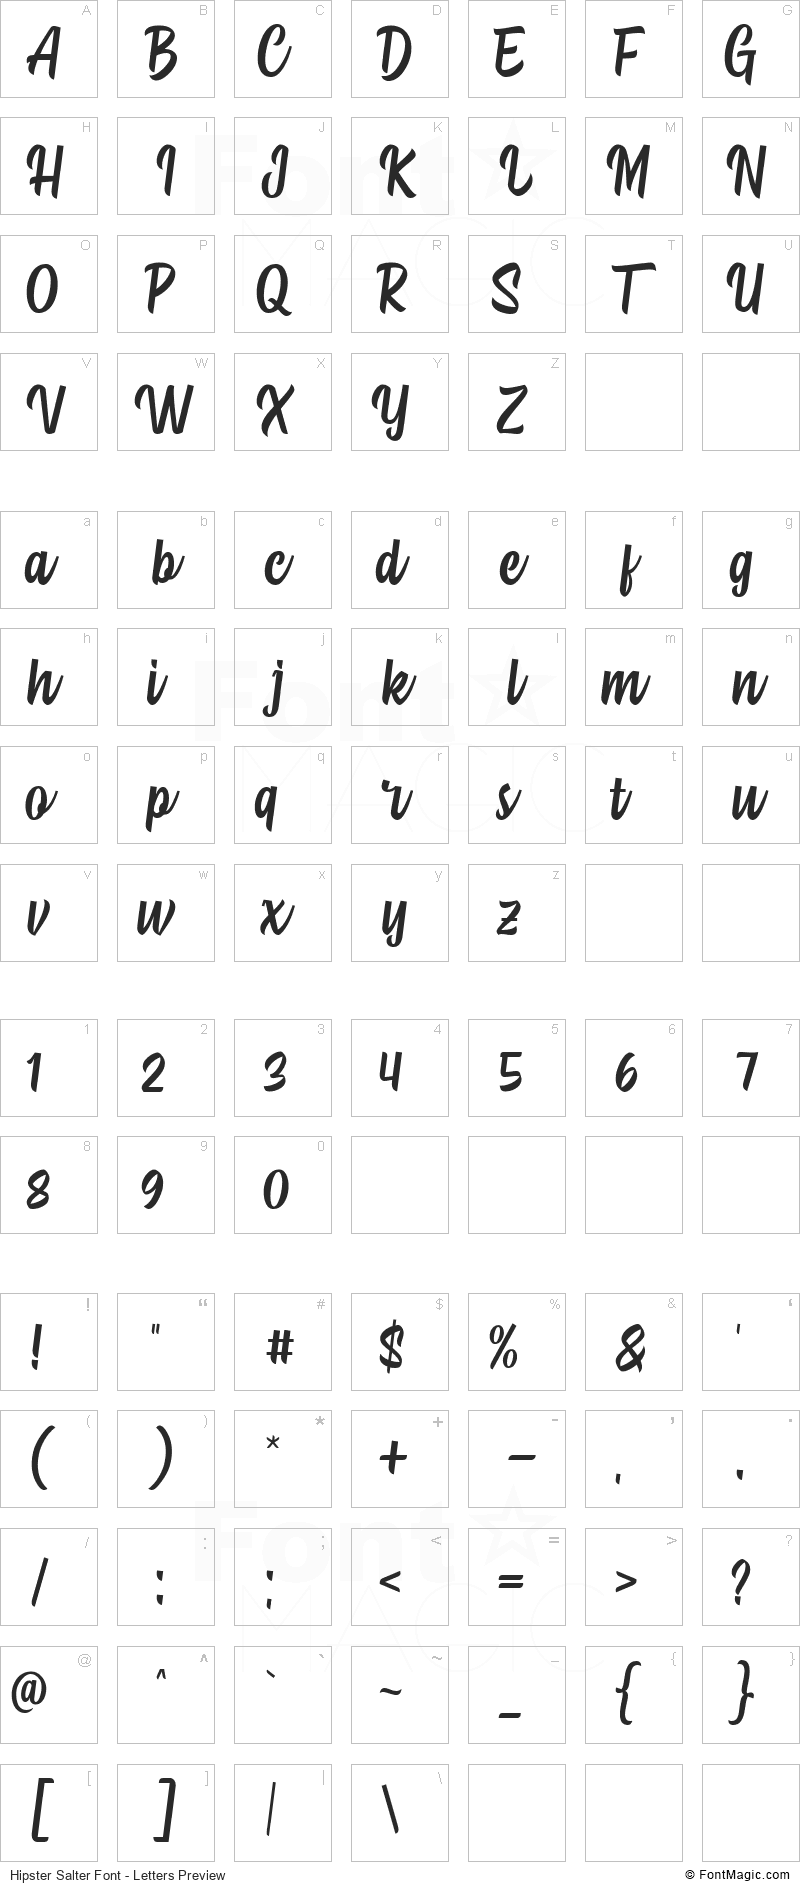 Hipster Salter Font - All Latters Preview Chart